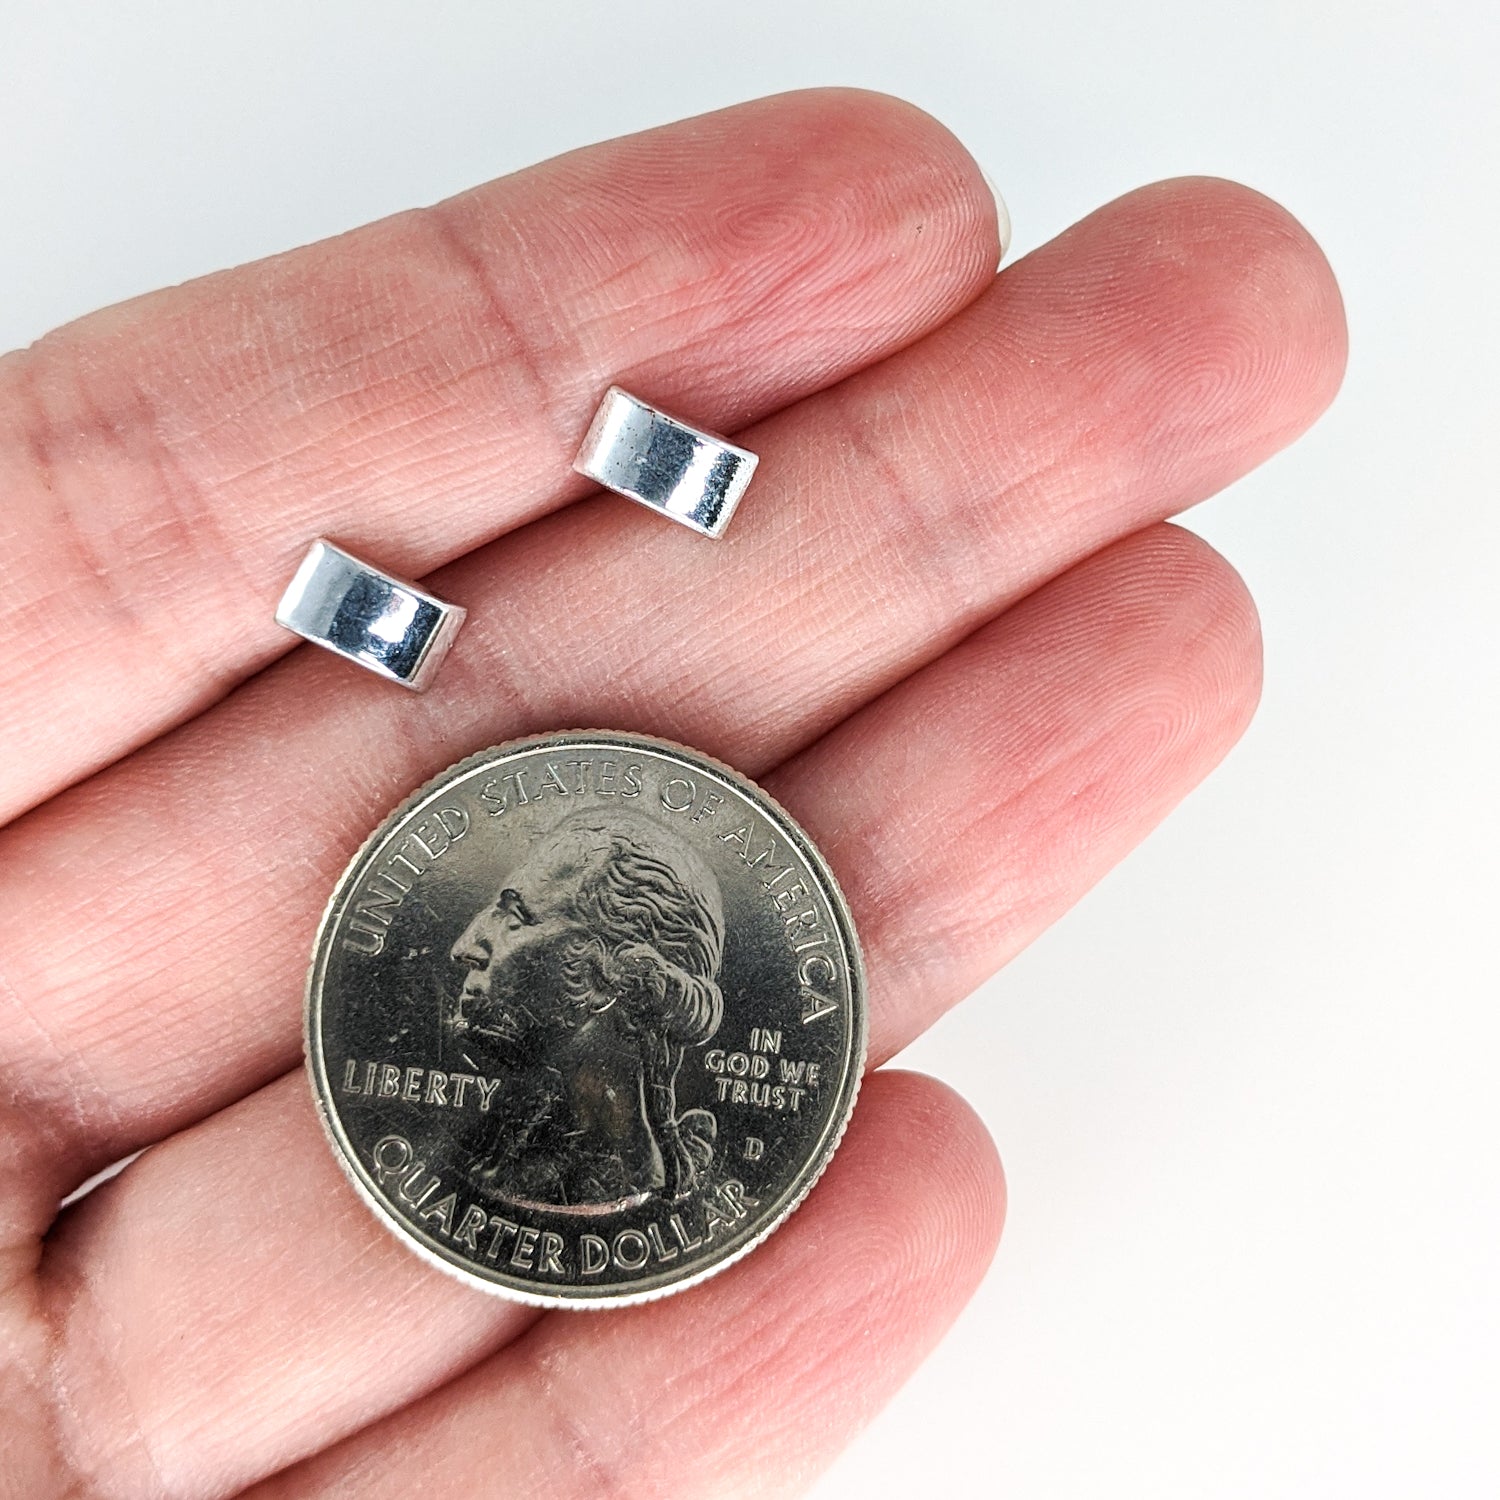 Tiny Arc Earrings (Studs) - size comparison hand and quarter